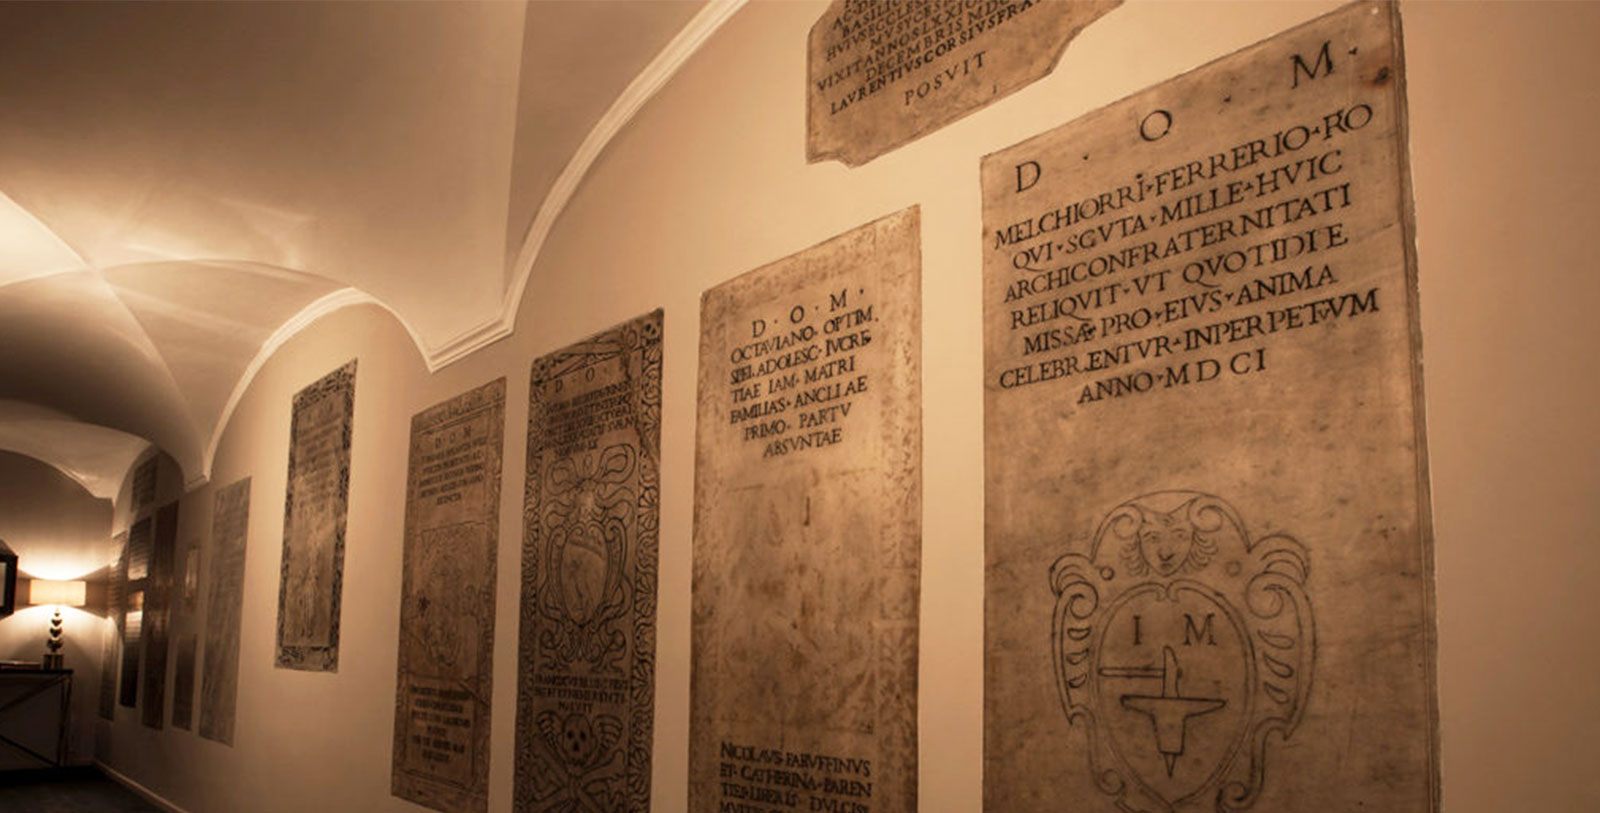 Image of Latin Inscriptions in the Hotel's Hallway, DOM Hotel, 1600, Member of Historic Hotels Worldwide, Rome, Italy, History